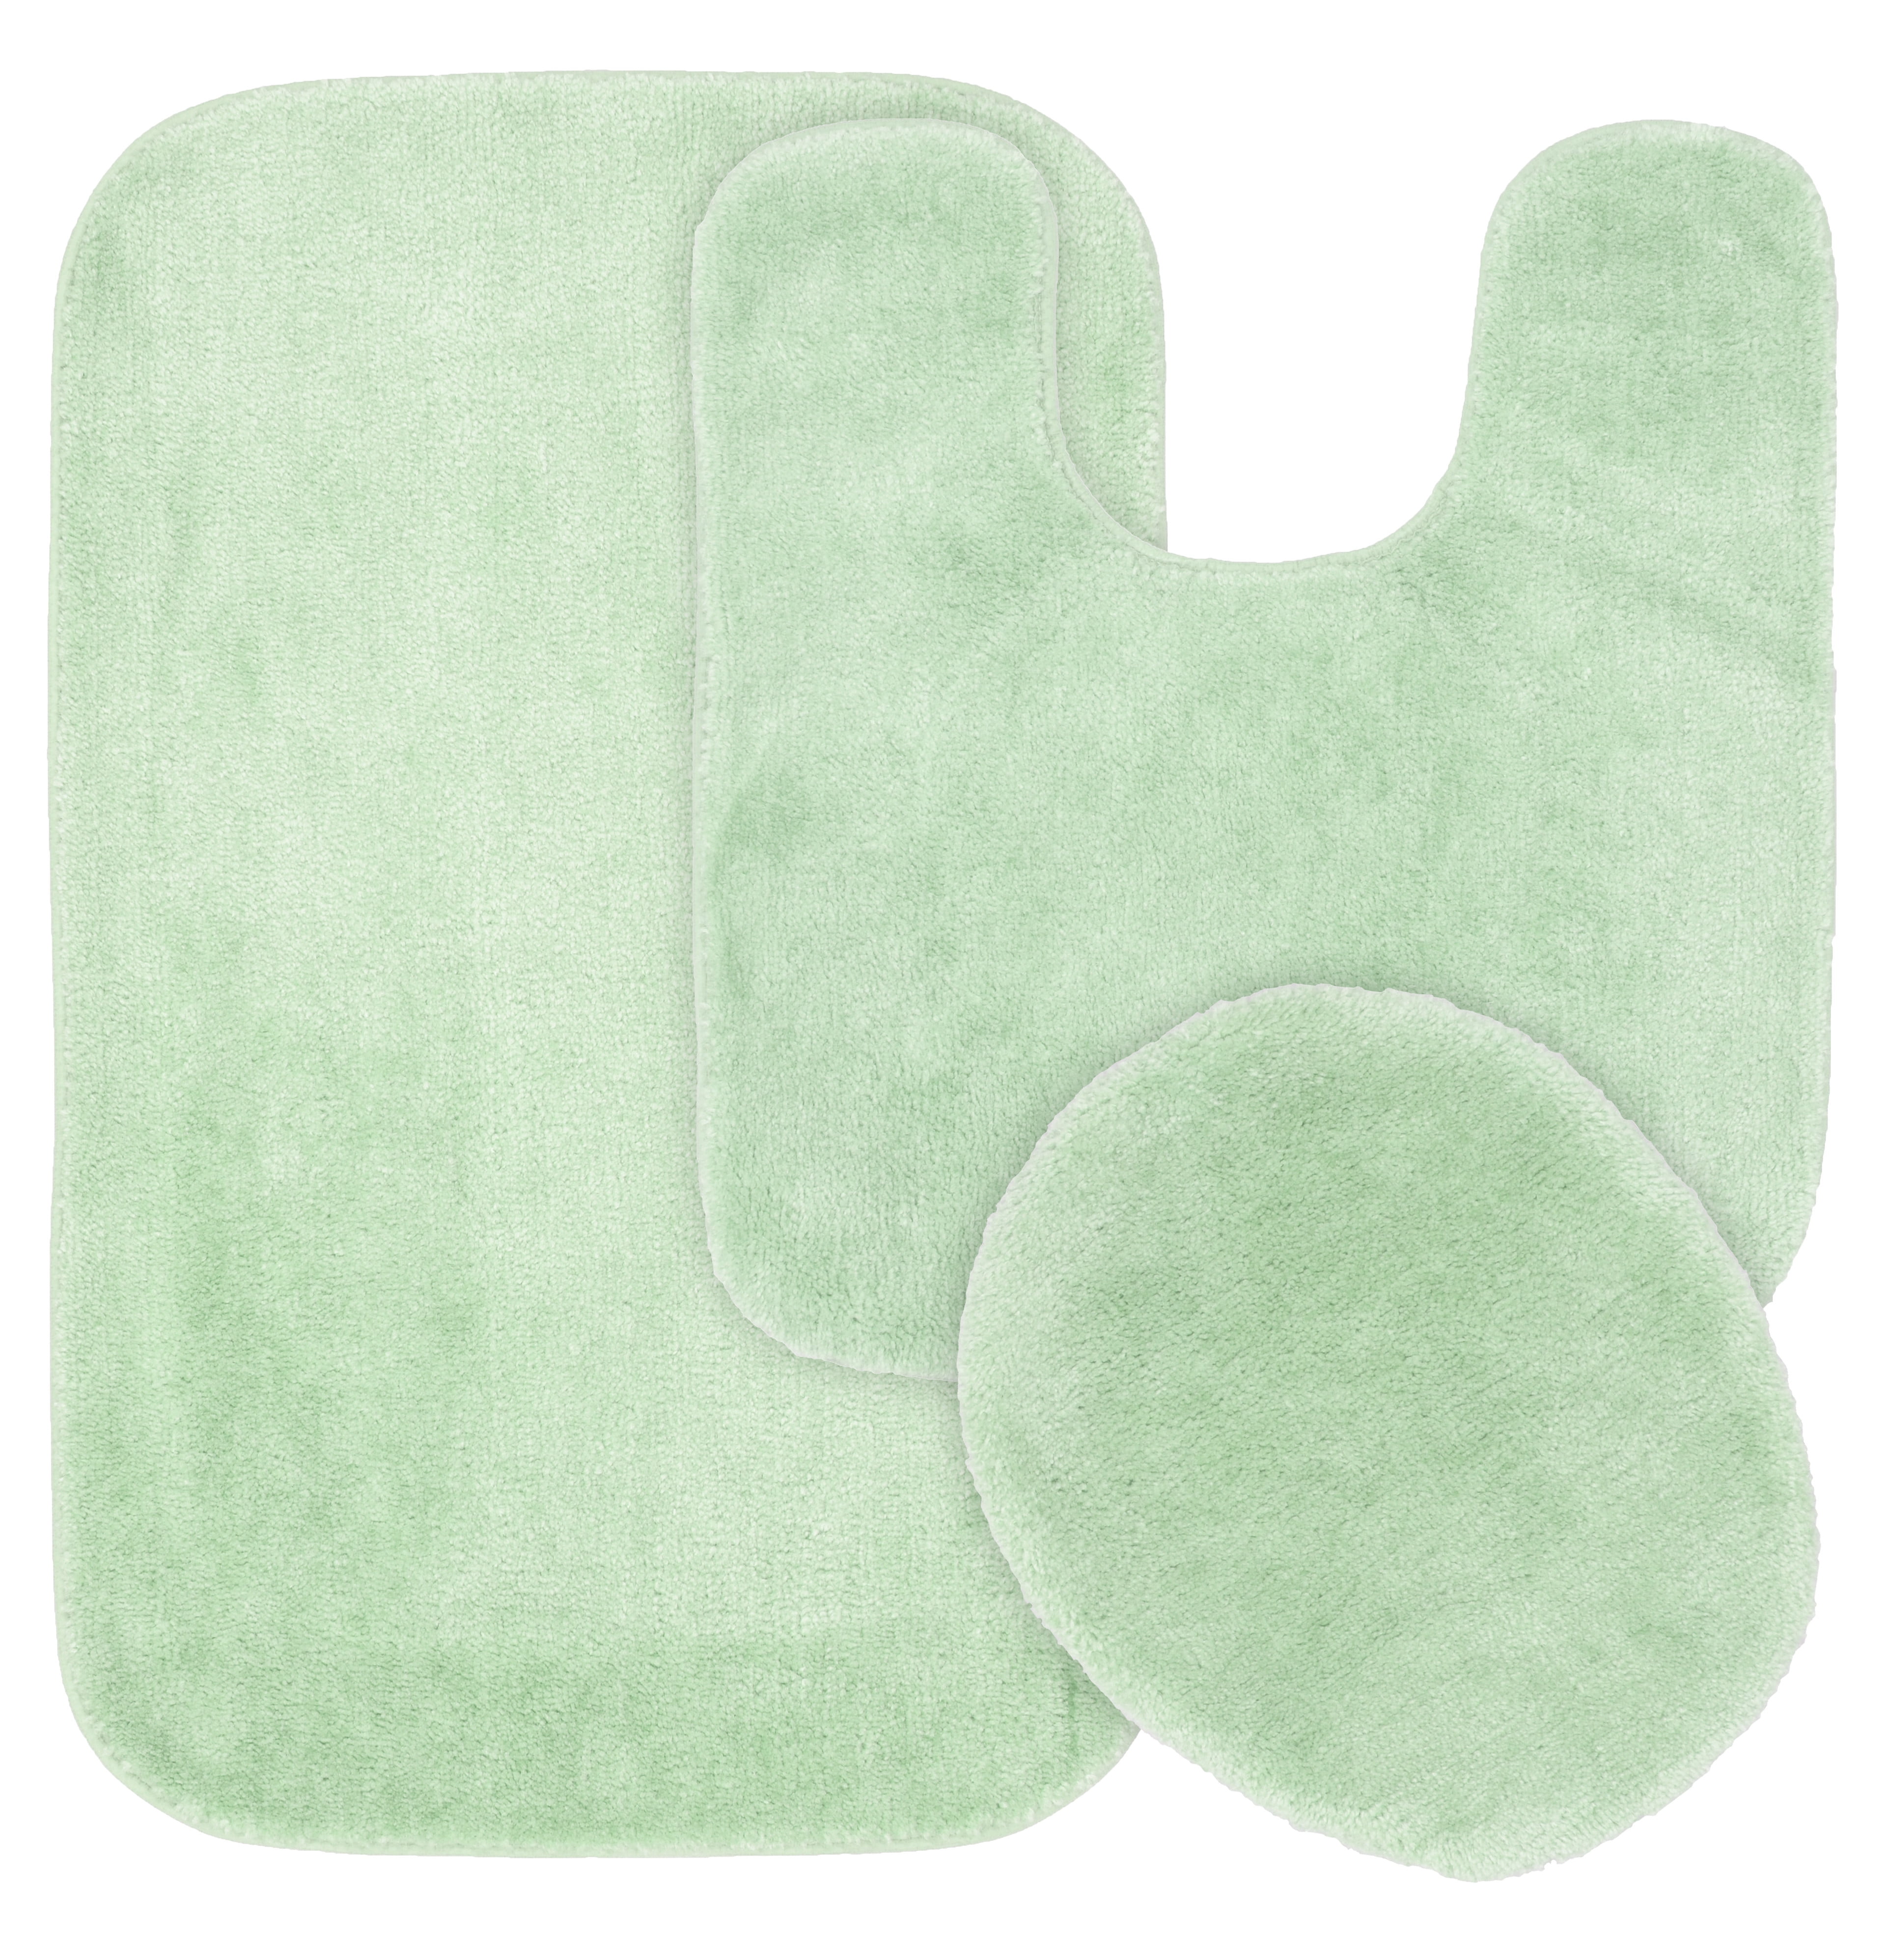 3 Piece Traditional Soft And Plush, Green Bathroom Rugs